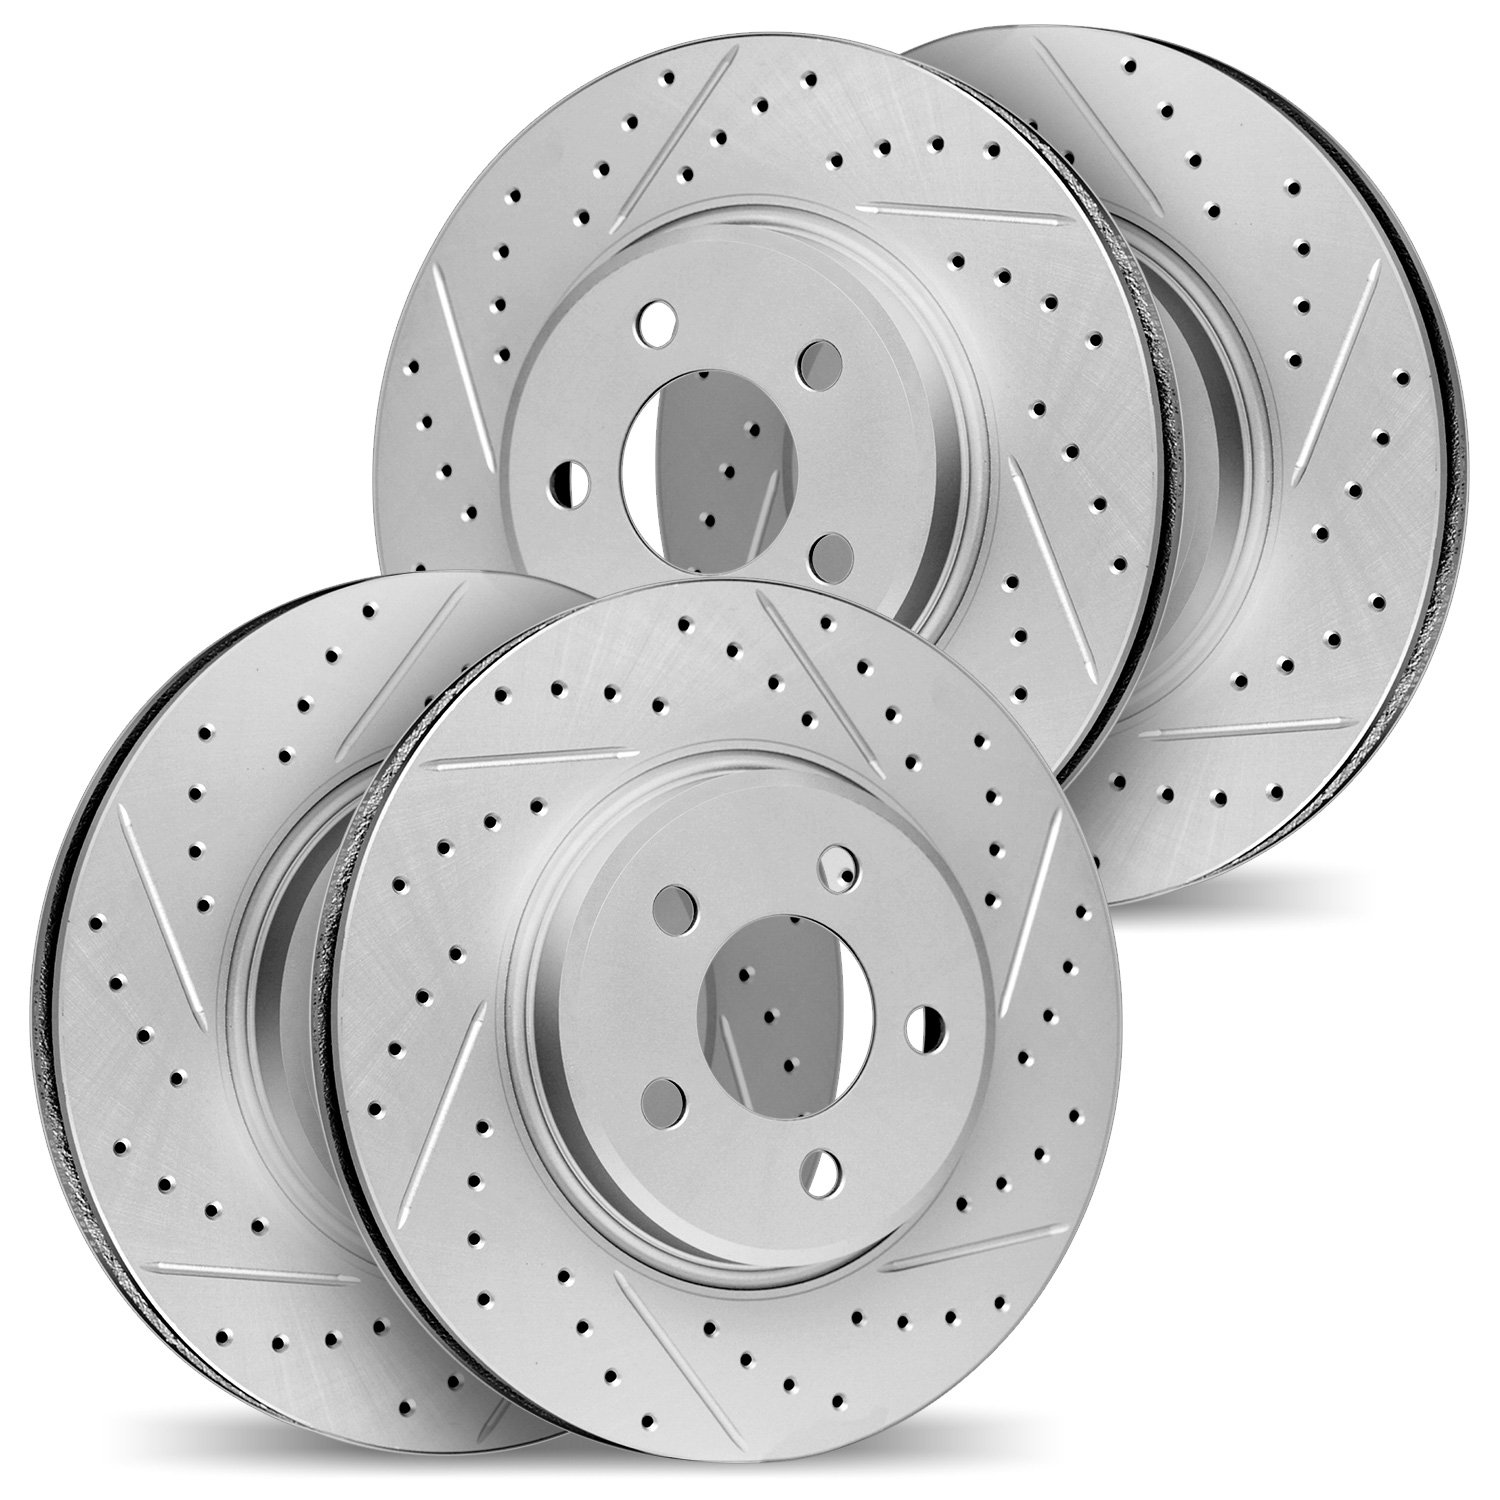 2004-13022 Geoperformance Drilled/Slotted Brake Rotors, 2003-2004 Subaru, Position: Front and Rear